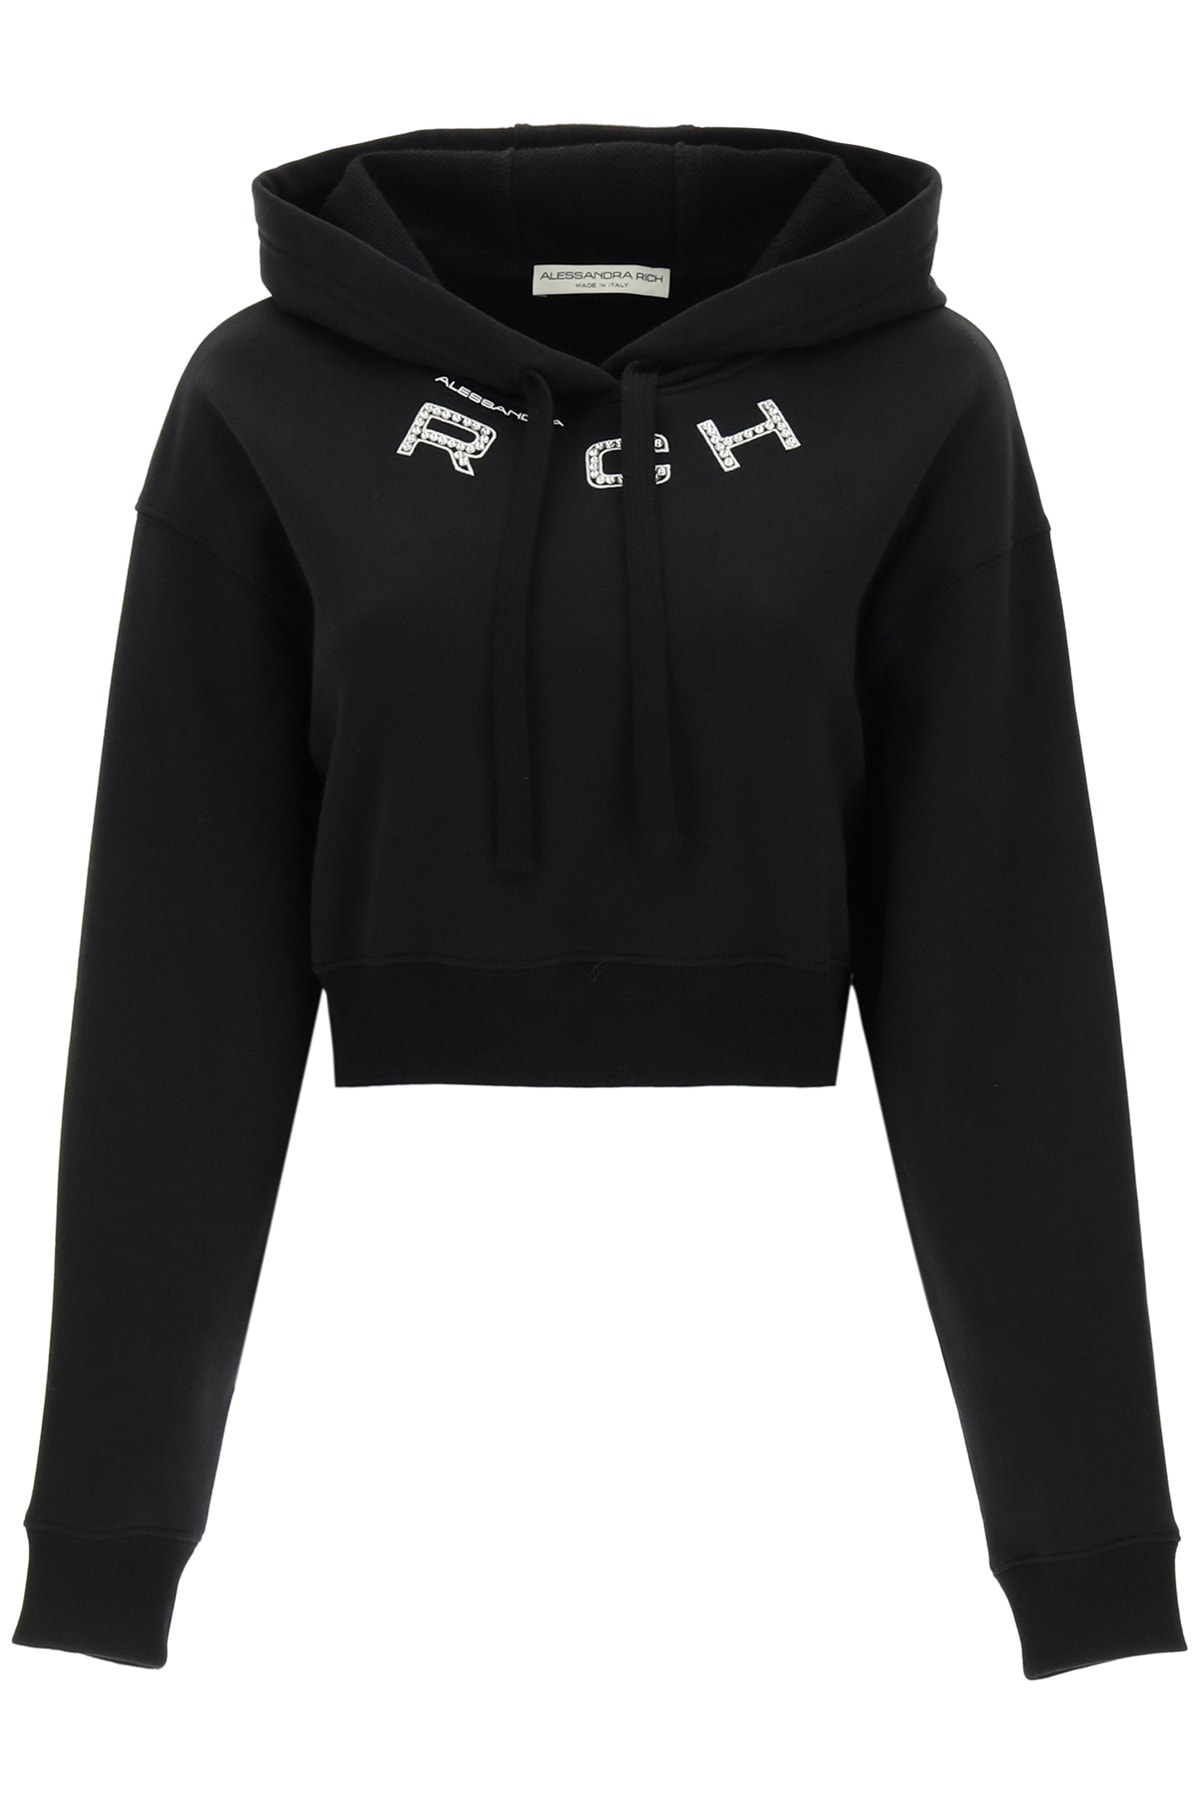 ALESSANDRA RICH CROPPED HOODIE WITH LOGO,FAB2068 F2874 900